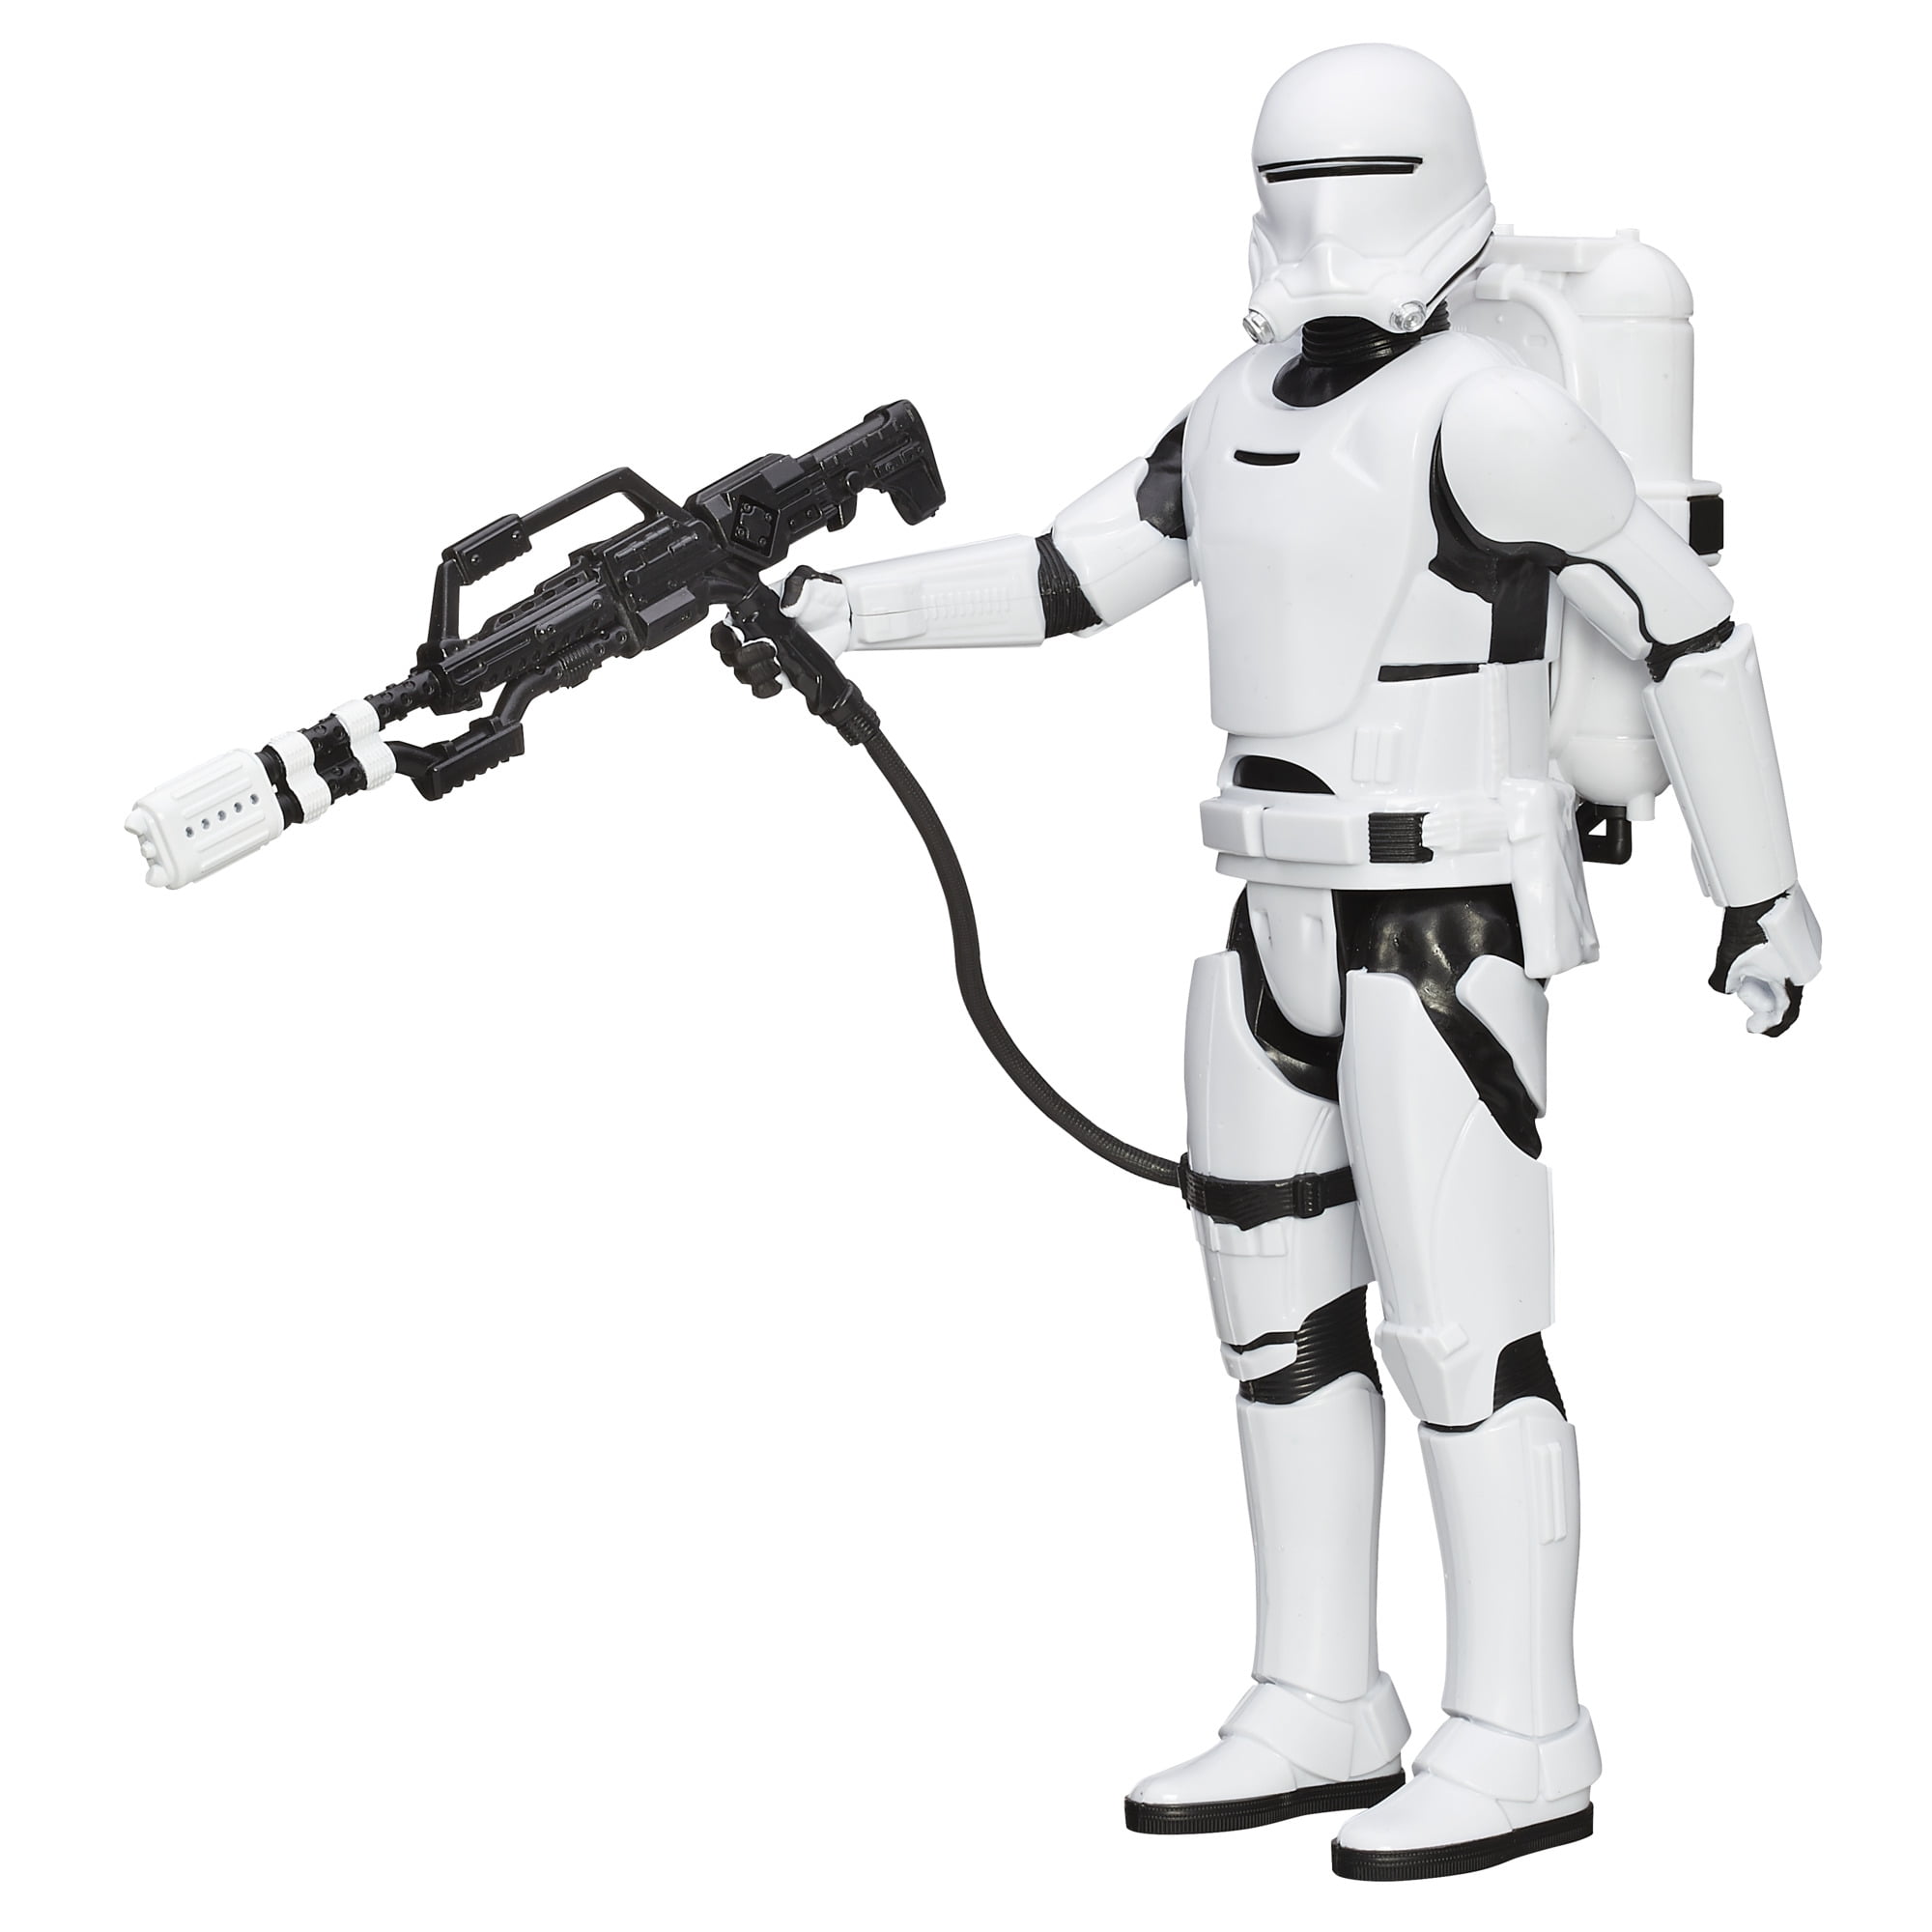 Flametrooper First Order Star Wars The Force Awakens Collection 2015 